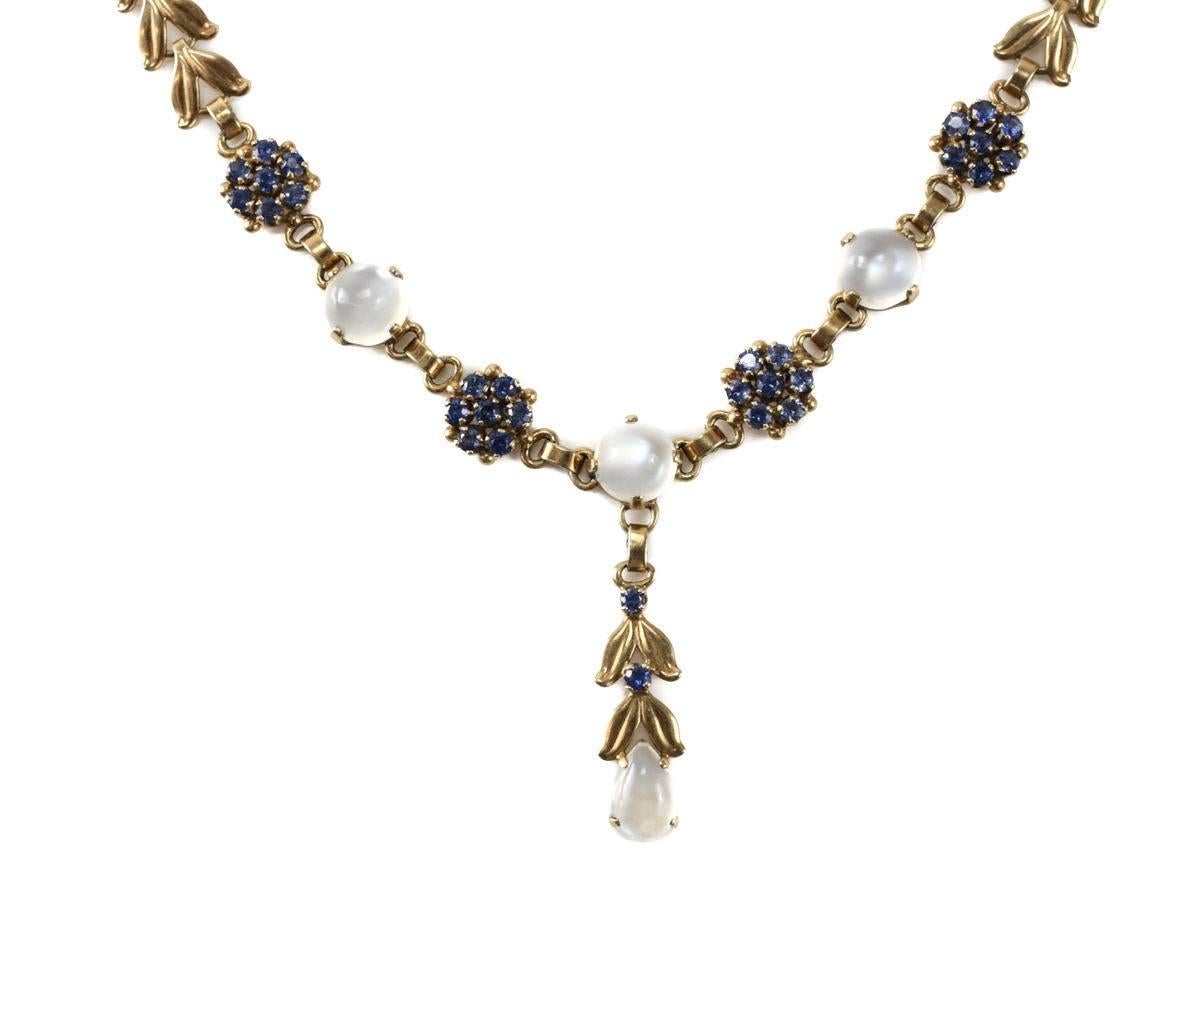 A stunning retro midcentury Tiffany & Co. 14-carat yellow gold moonstone and sapphire necklace choker. The fine leaf form linked necklace has four (3 round cut & one teardrop) cabochon moonstones with 30 round cut sapphire stones to the central